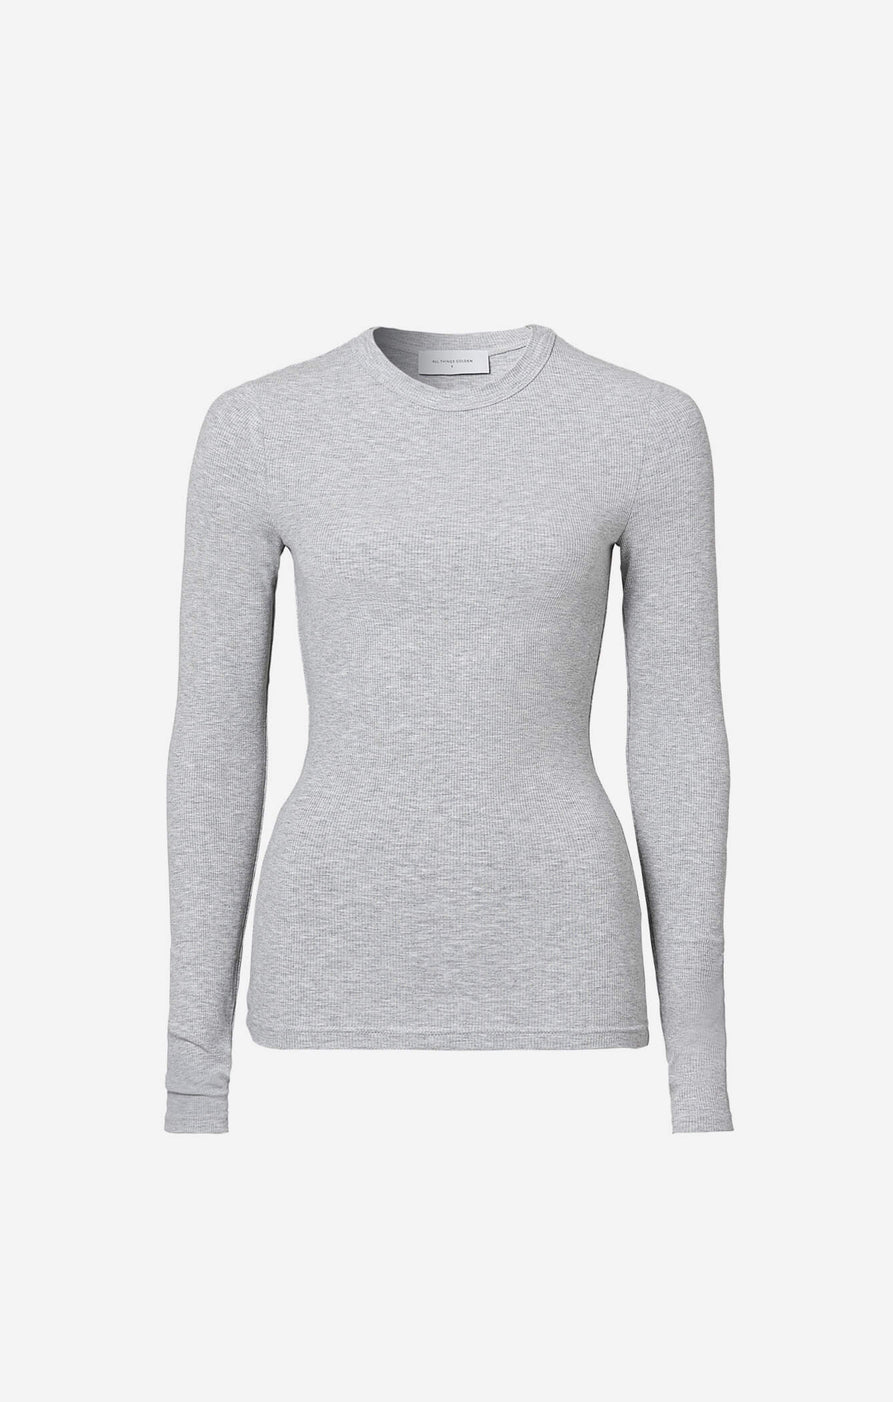 THE LUXE RIB L/S - MID GREY